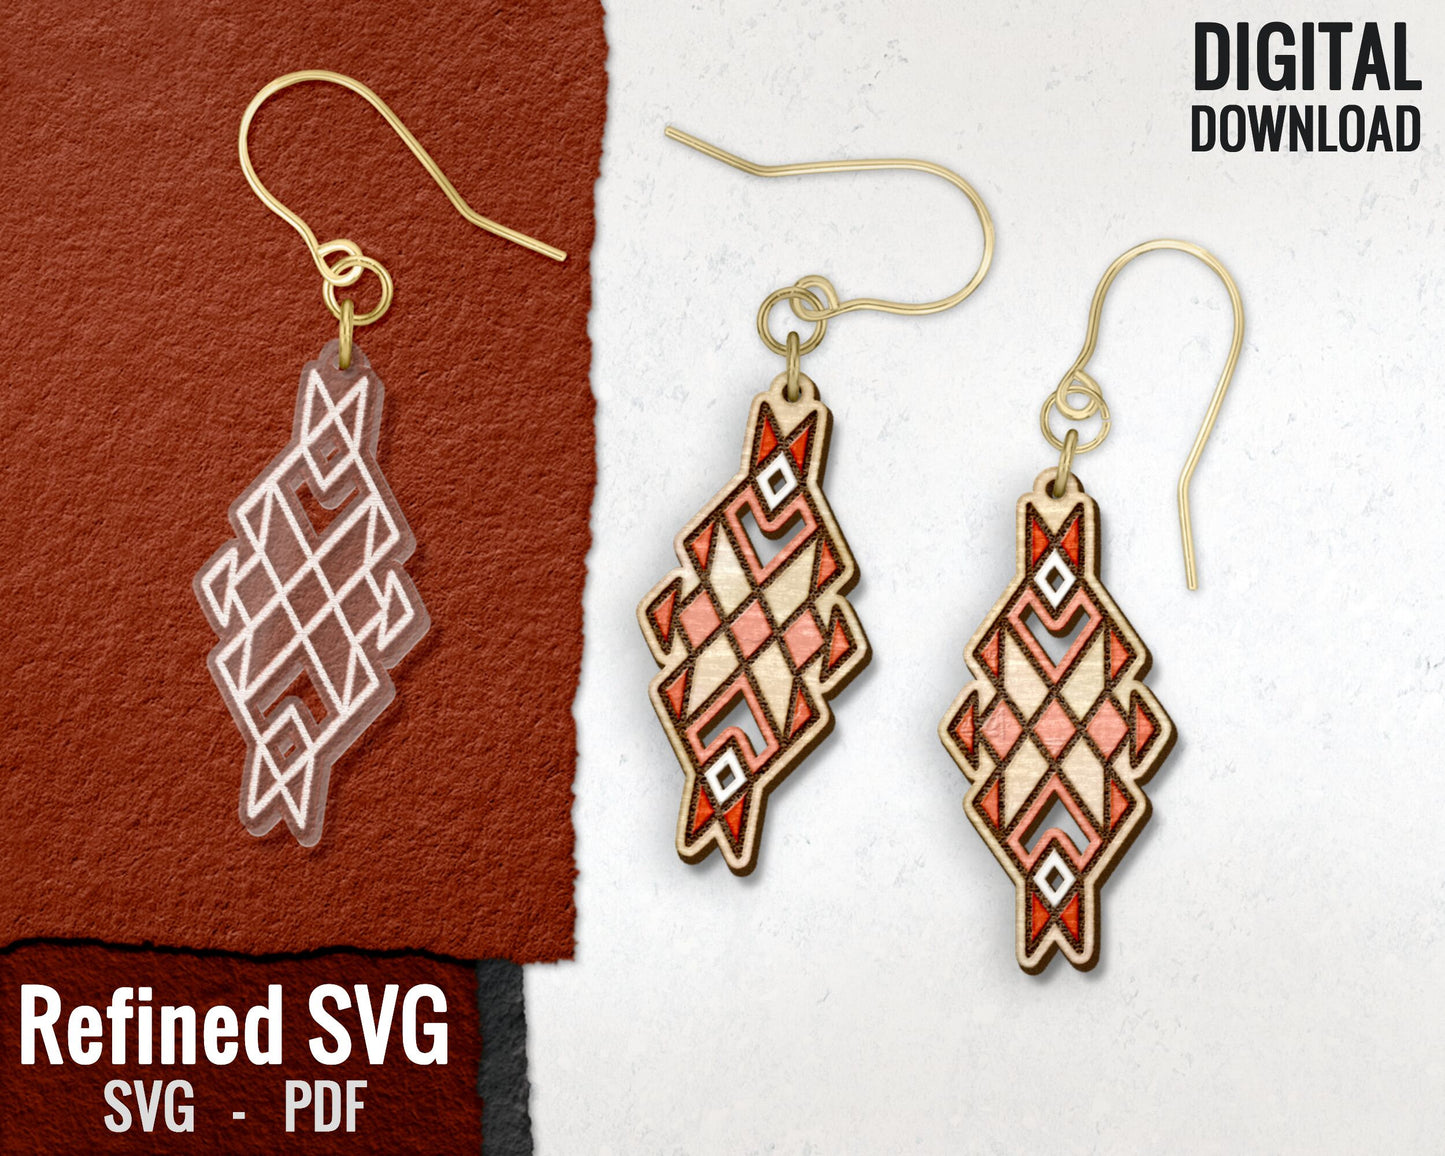 Aztec Inspired Hair Clips + Matching Earring SVG File Set, Aztec 2 Hair Clip Files + Earring SVG Files, Set of Claw Hair Clip Laser Design